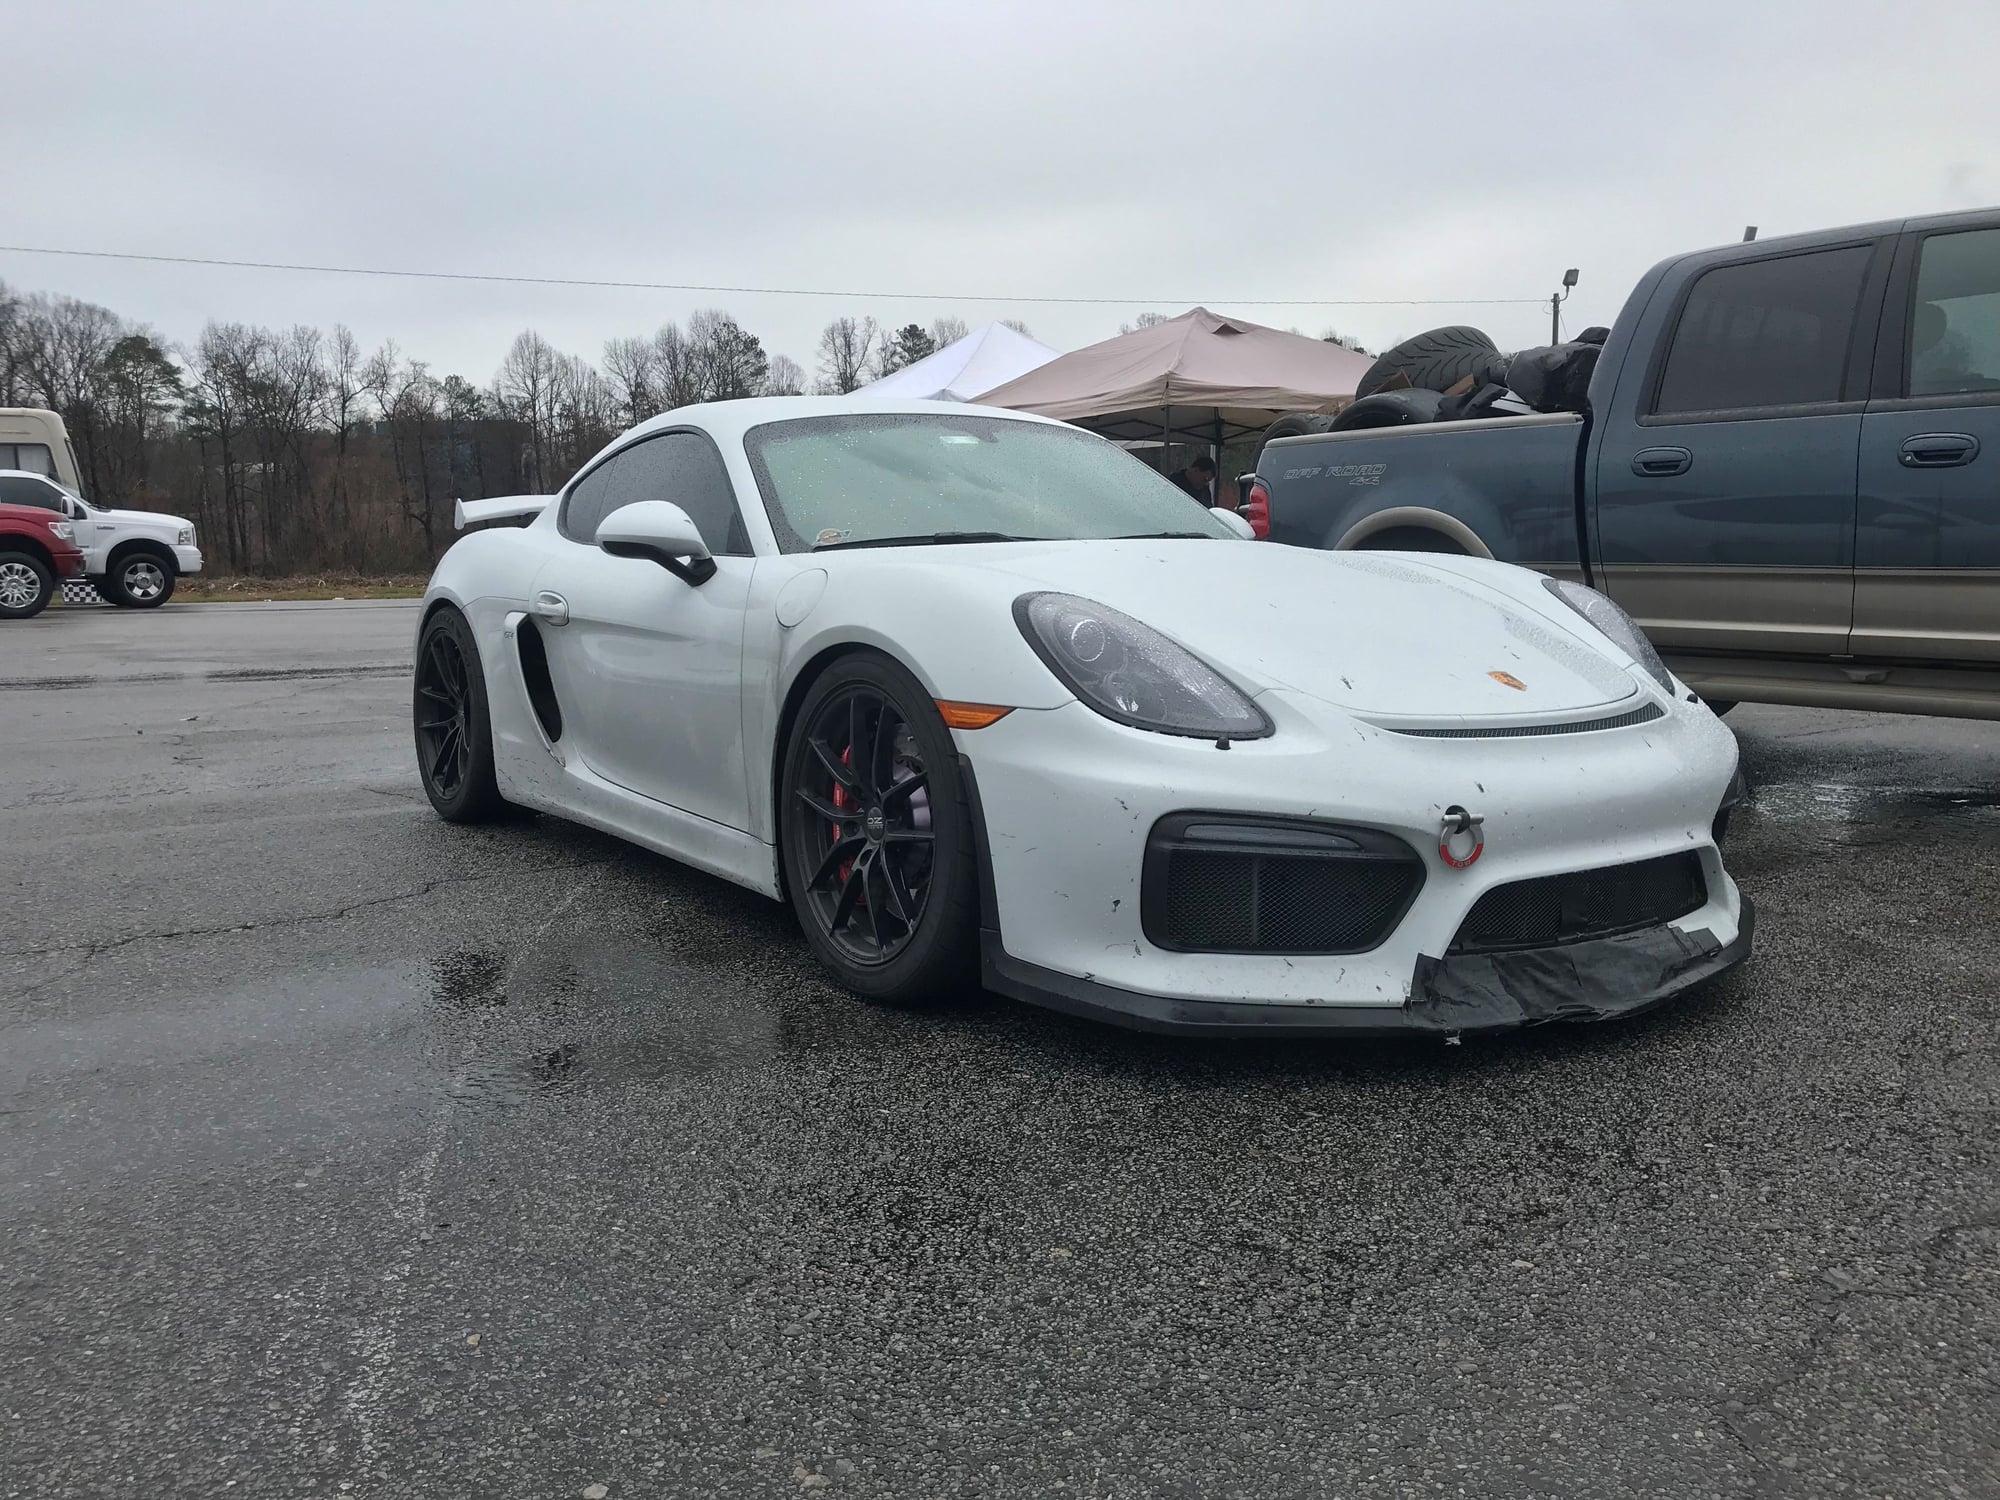 2016 Porsche Cayman GT4 - FS: Track Warrior Cayman GT4 - Certified Pre-Owned Warranty - NYC / NJ Area - Used - VIN WP0AC2A80GK192384 - 25,500 Miles - 6 cyl - 2WD - New York, NY 10028, United States